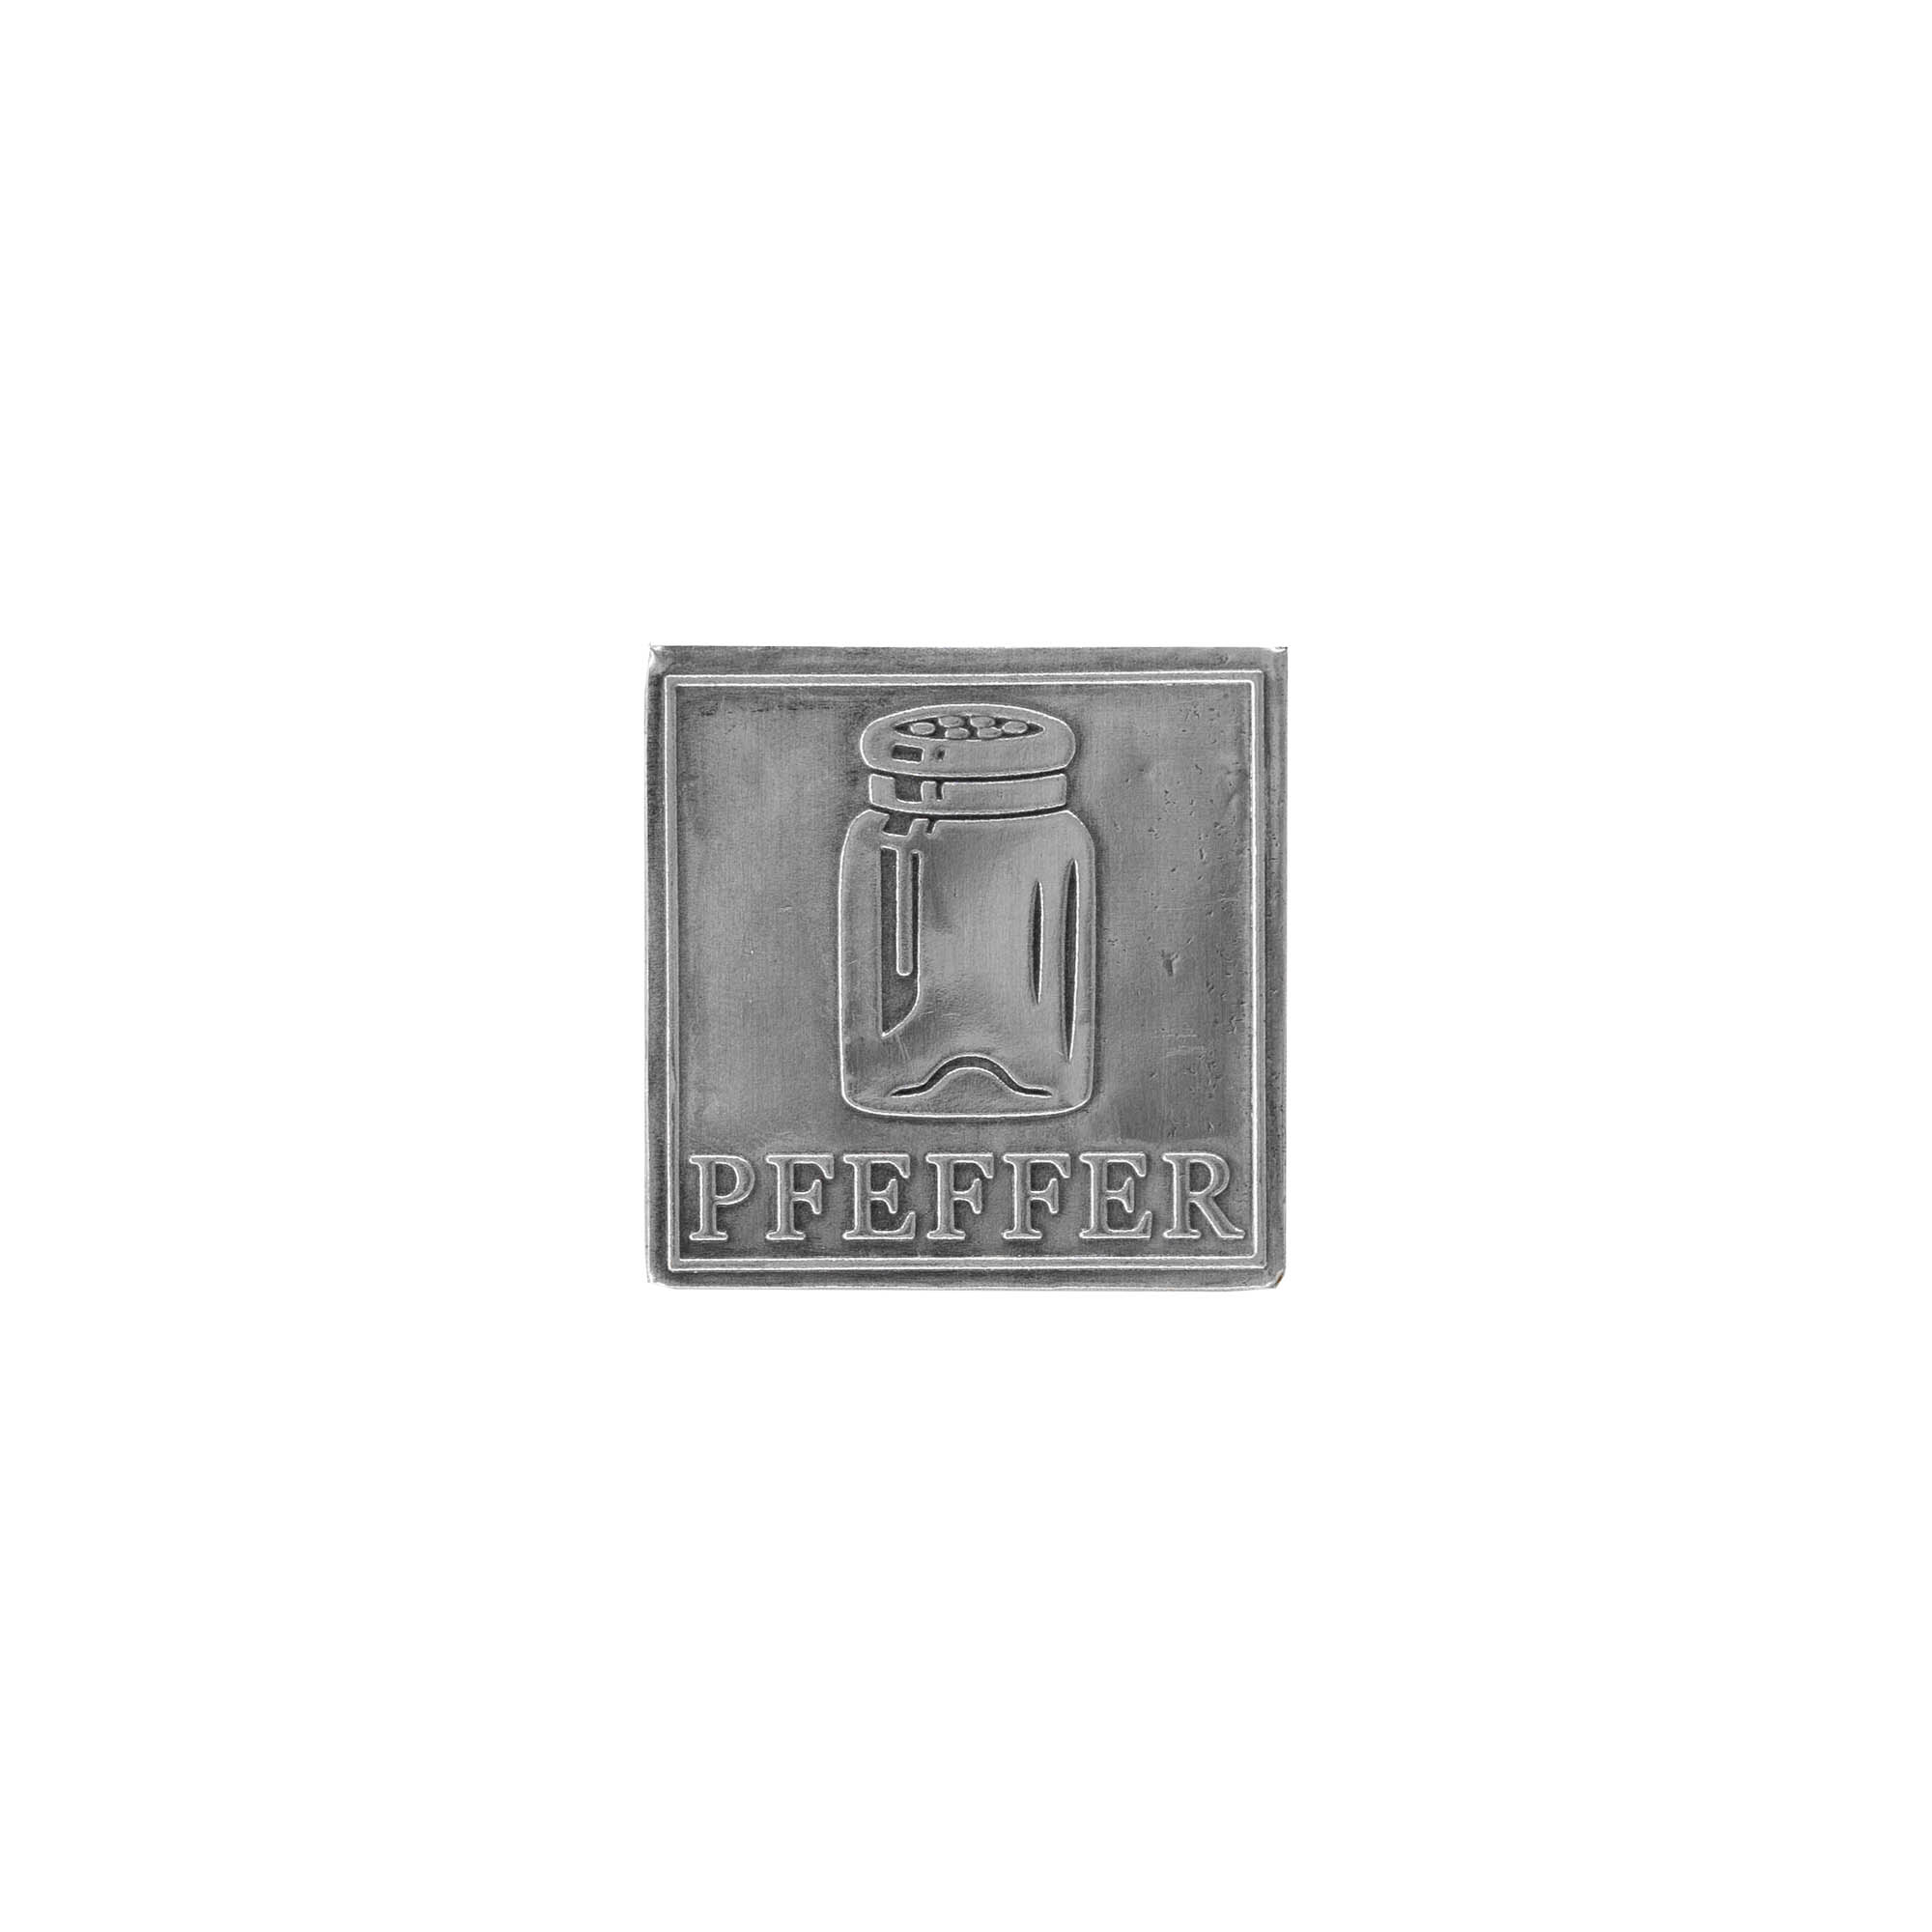 Pewter tag 'Pepper', square, metal, silver